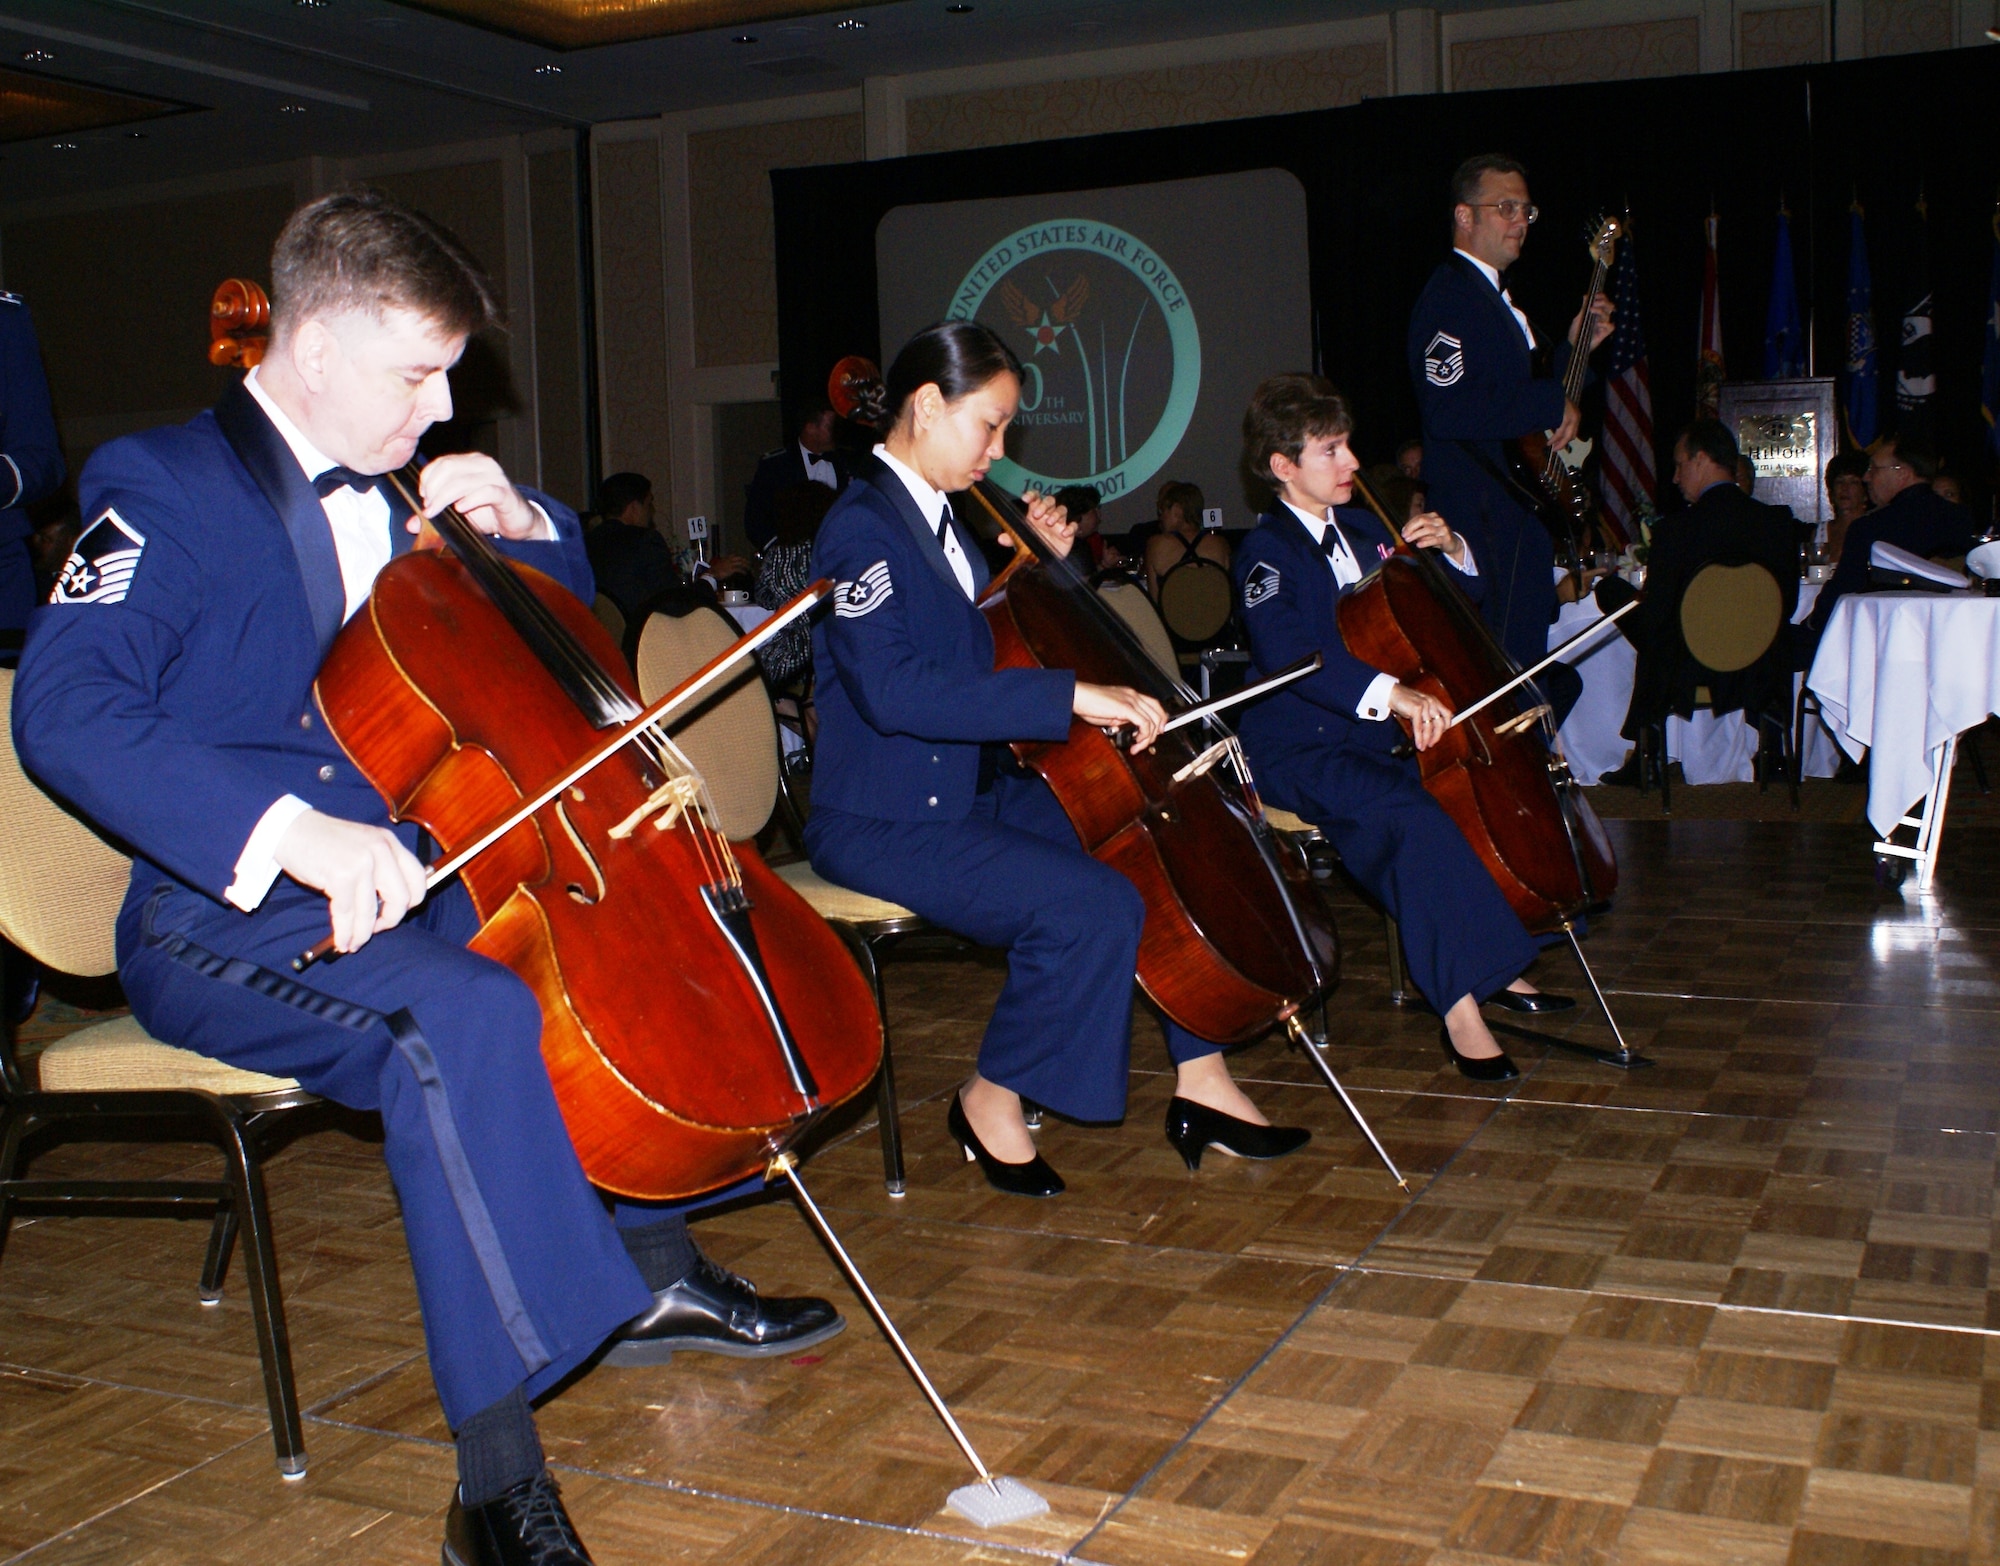 Members of The Air Force Strings entertain the 580 military and civilian personnel attending Homestead Air Reserve Base’s "Heritage to Horizons" Air Force ball, Nov. 2, 2007.  Appearing as The United States Air Force Strolling Strings since 1954, The Air Force Strings has had the honor of performing at the White House for every president from Eisenhower to Clinton.  The Air Force Strings is one of the most diverse and flexible units of The United States Air Force Band.  The night’s event was part of a year long celebration commemorating the 60th Anniversary of the U.S. Air Force and recently deployed military members. The gala was co-hosted by the 482nd Fighter Wing, Homestead ARB, Fla., and the Greater Homestead/Florida City Chamber of Commerce Military Affairs Committee. (U.S. Air Force photo/Tim Norton)